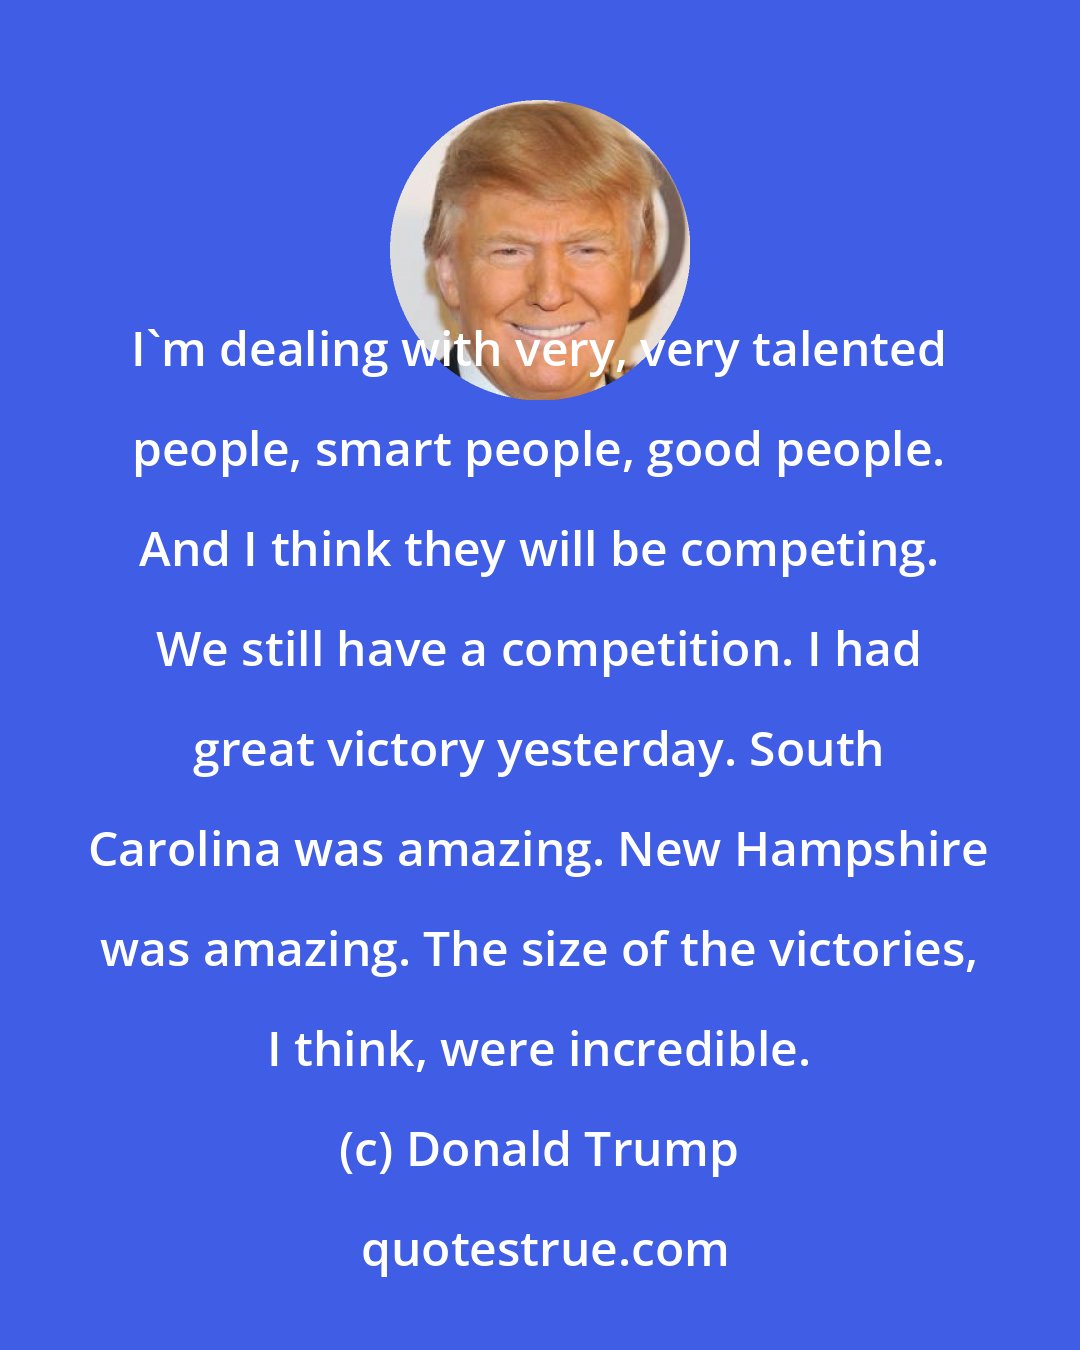 Donald Trump: I'm dealing with very, very talented people, smart people, good people. And I think they will be competing. We still have a competition. I had great victory yesterday. South Carolina was amazing. New Hampshire was amazing. The size of the victories, I think, were incredible.